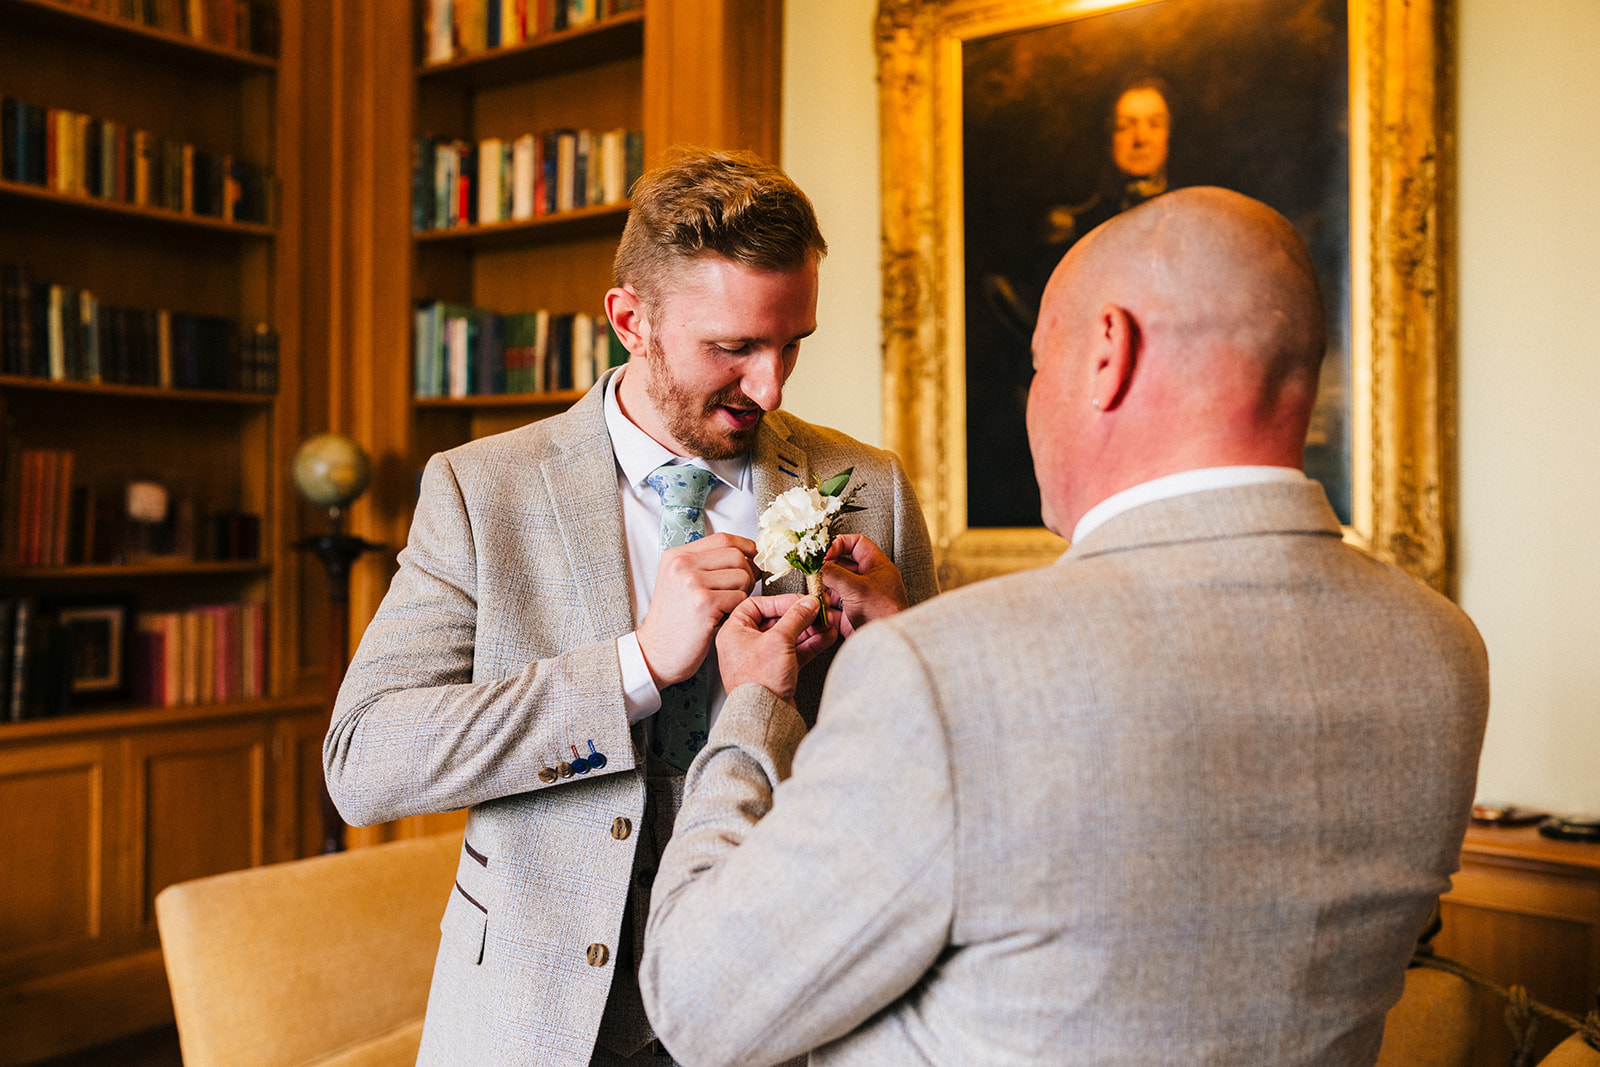 Hodsock Priory Wedding Photography - the groom having help with his buttonhole flowers